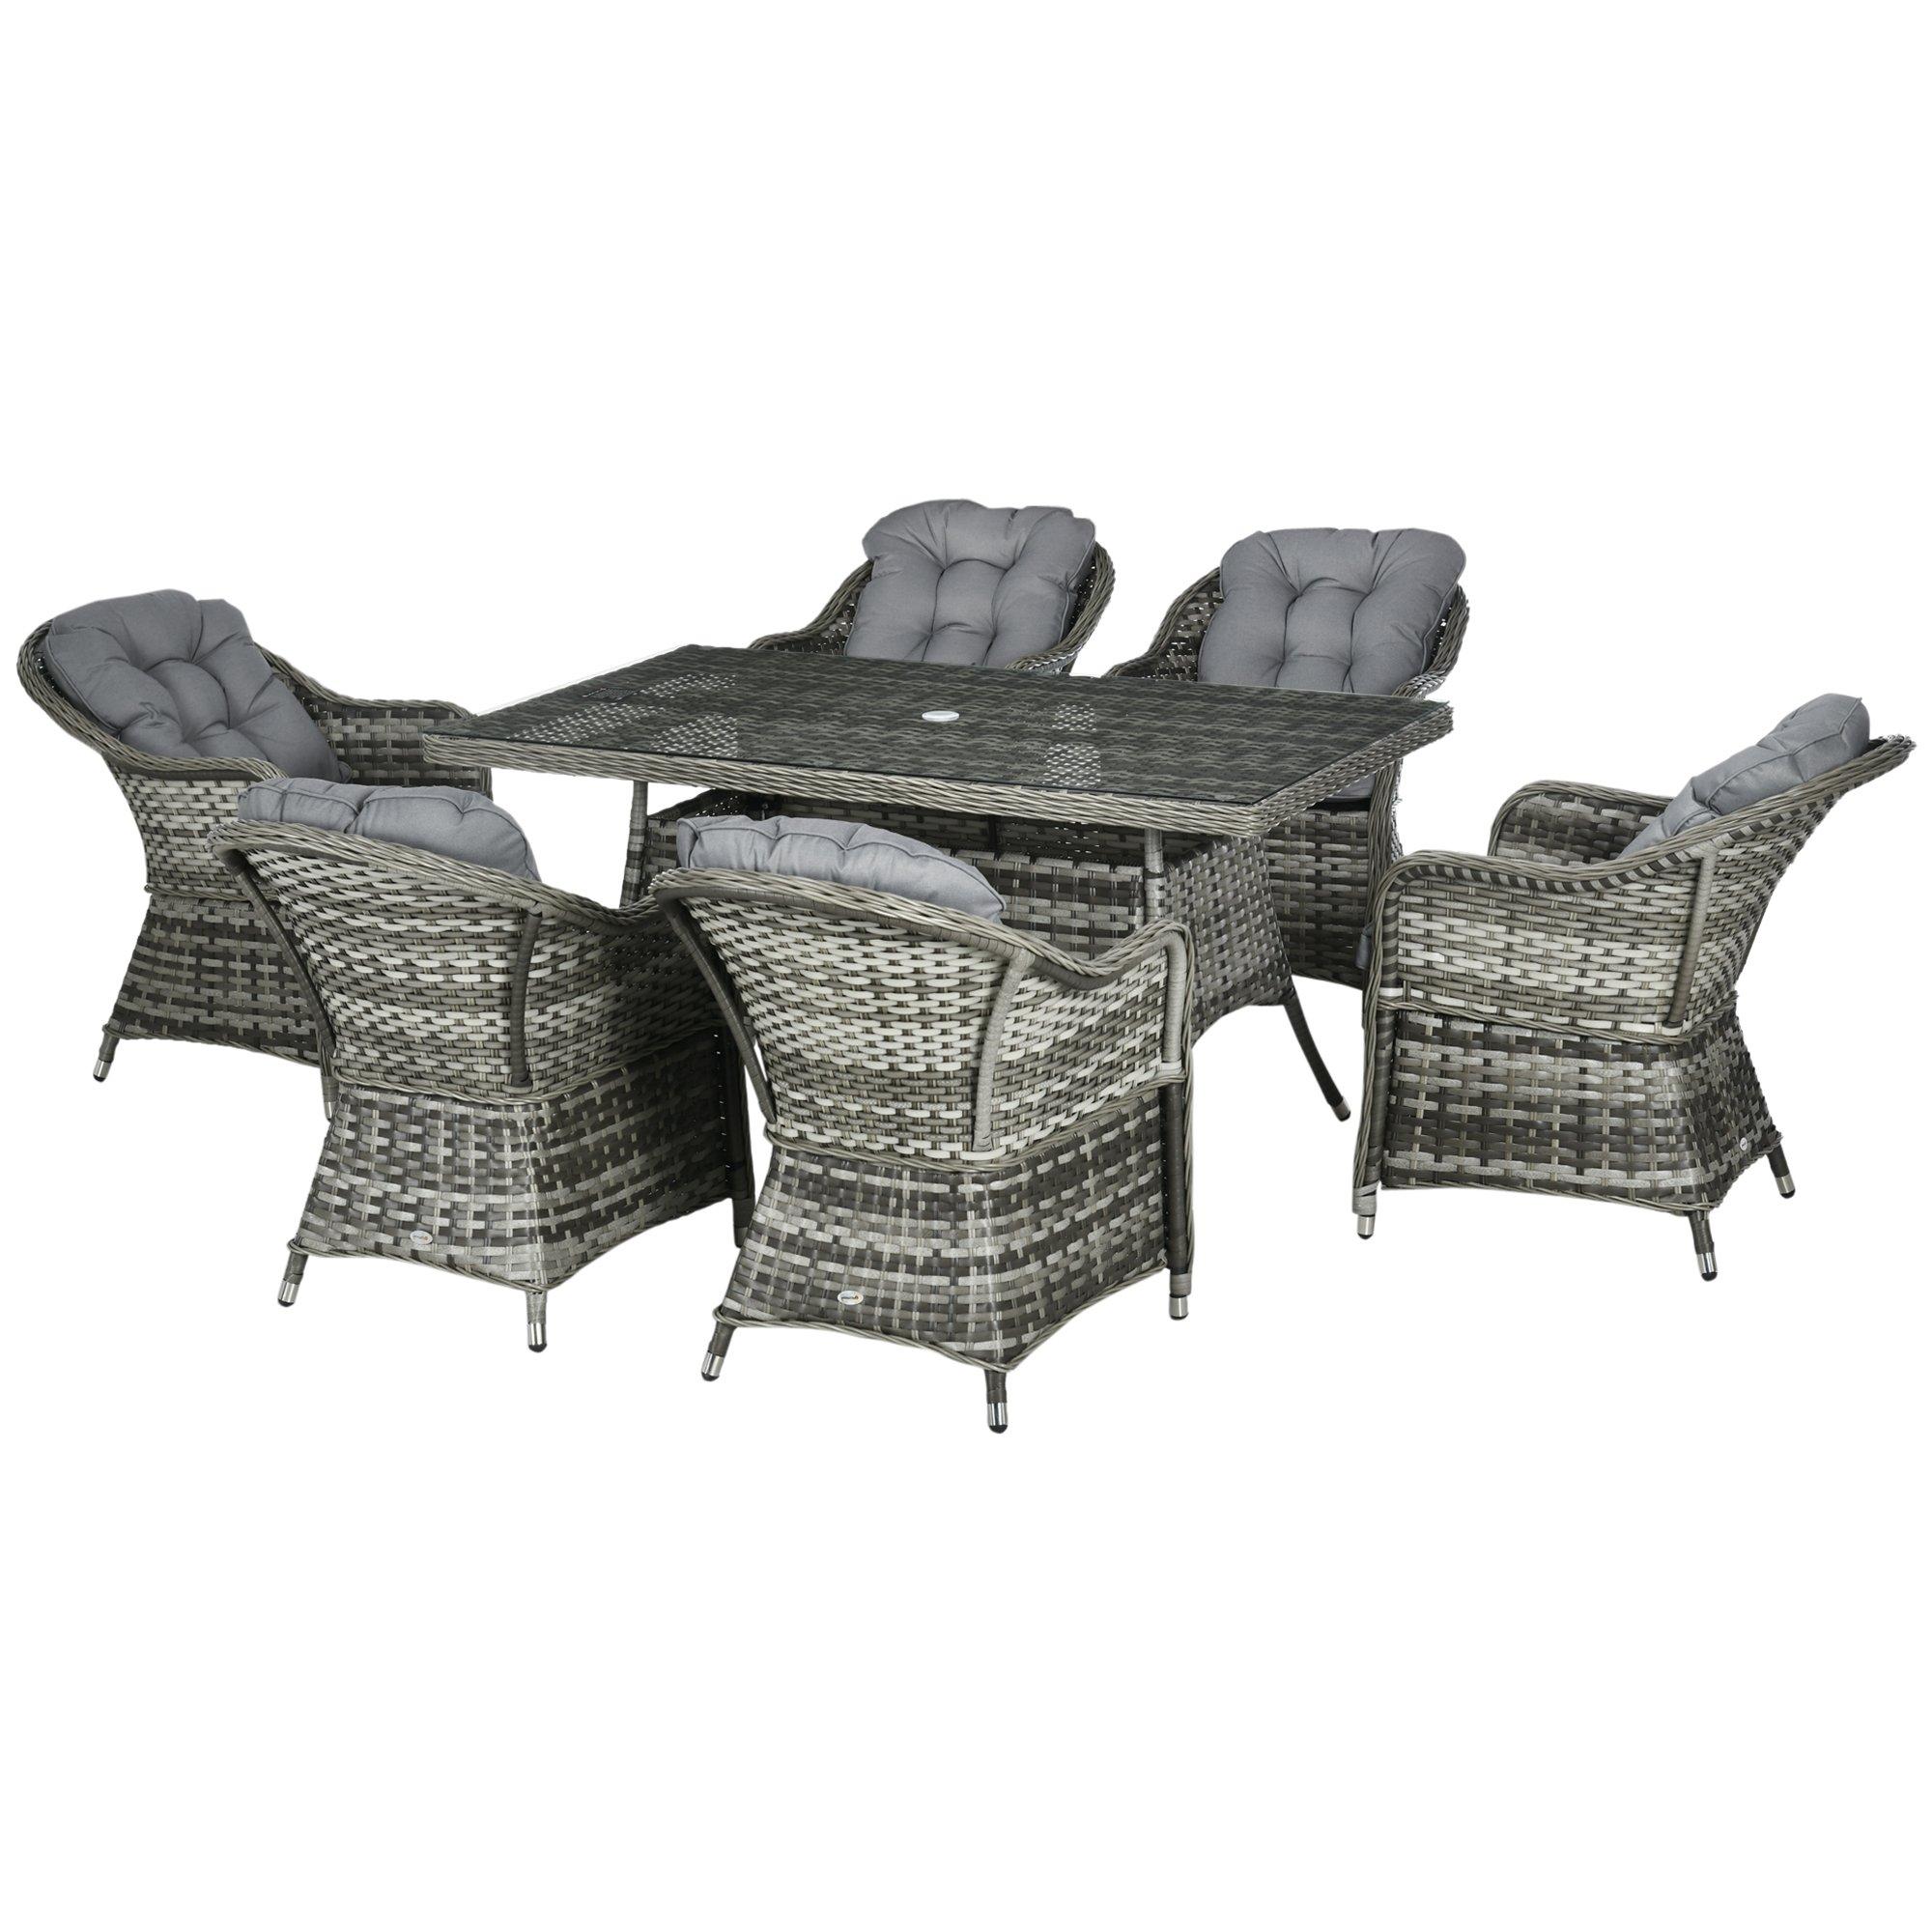 7 PCs Rattan Dining Sets, Outdoor Dining Set with Tempered Glass Umbrella Hole